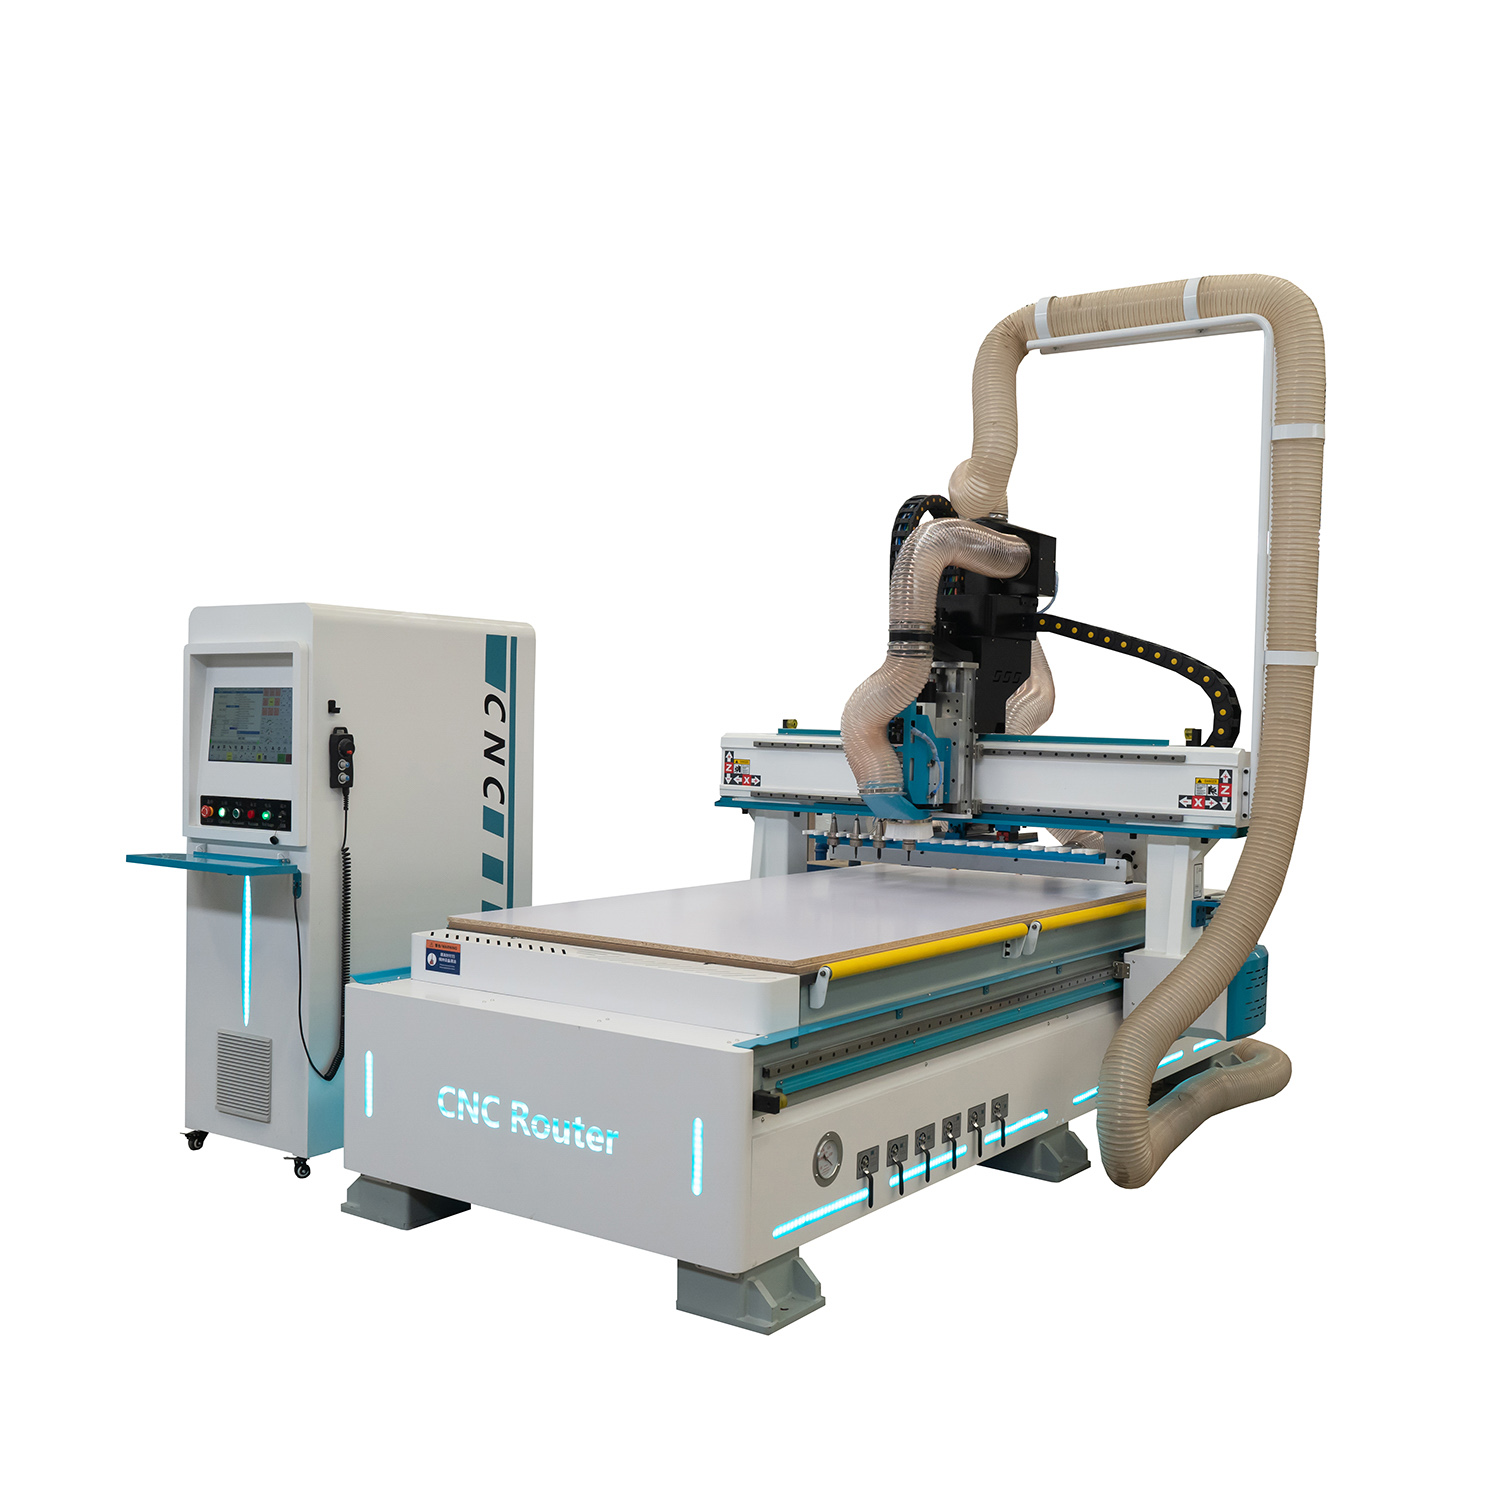 Linear Atc CNC Router for Wood Door Carving Furniture Making Machine with a Saw Cut Featured Image